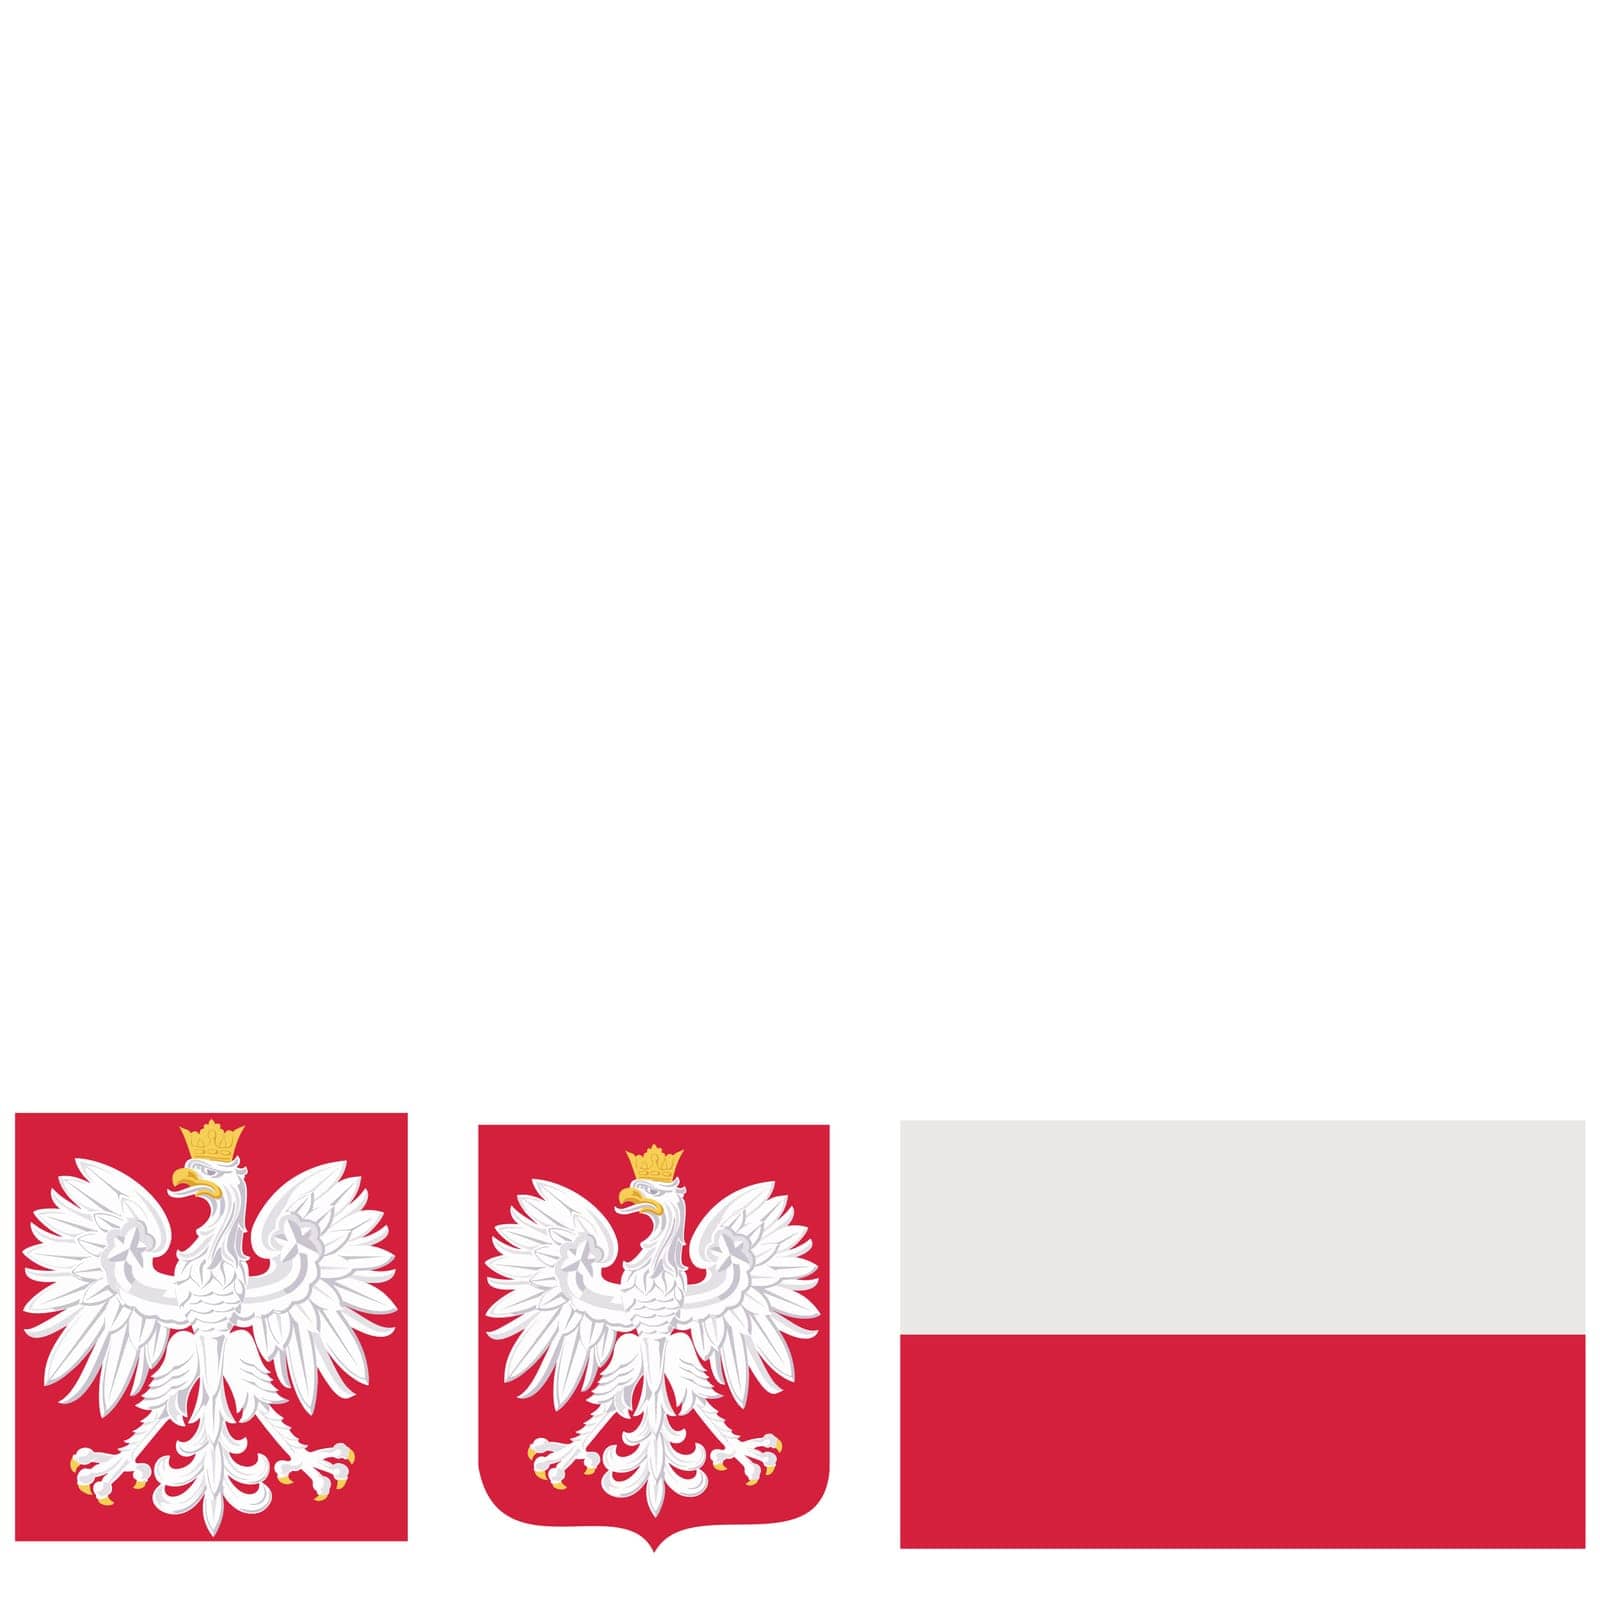 The Polish flag and the national emblem are officially approved and honored throughout the world. by fotodrobik